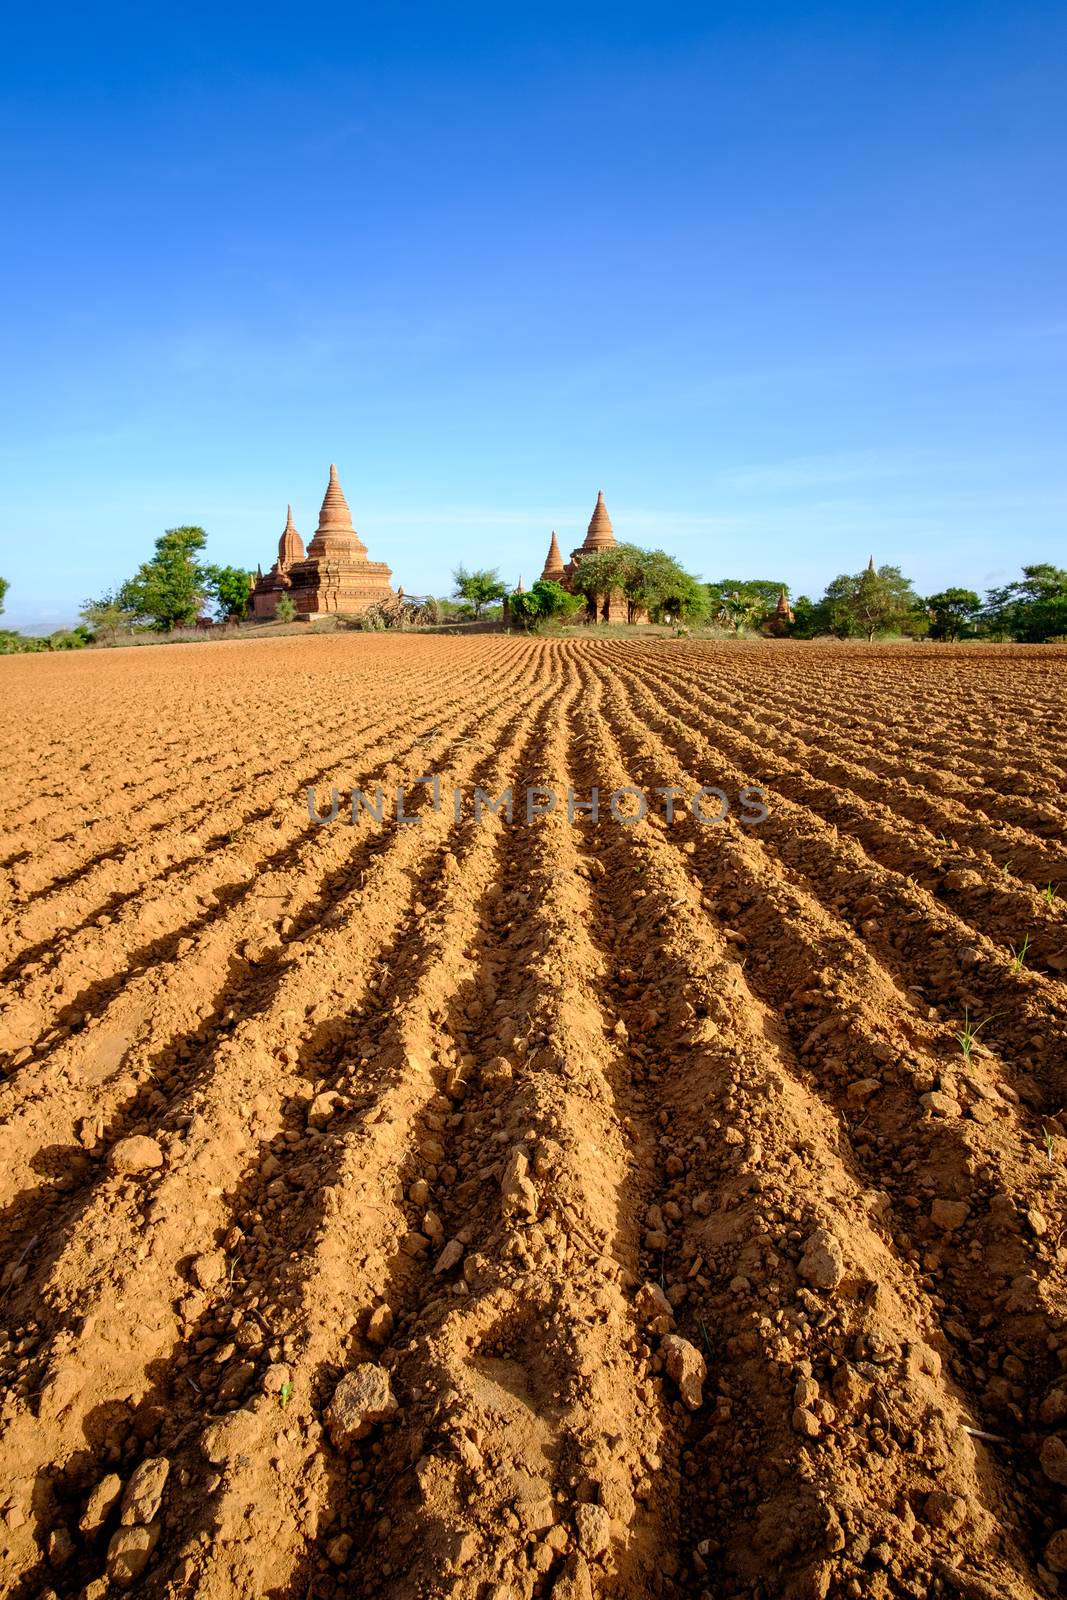 Landscape view of field and temples in Bagan area, Myanmar by martinm303